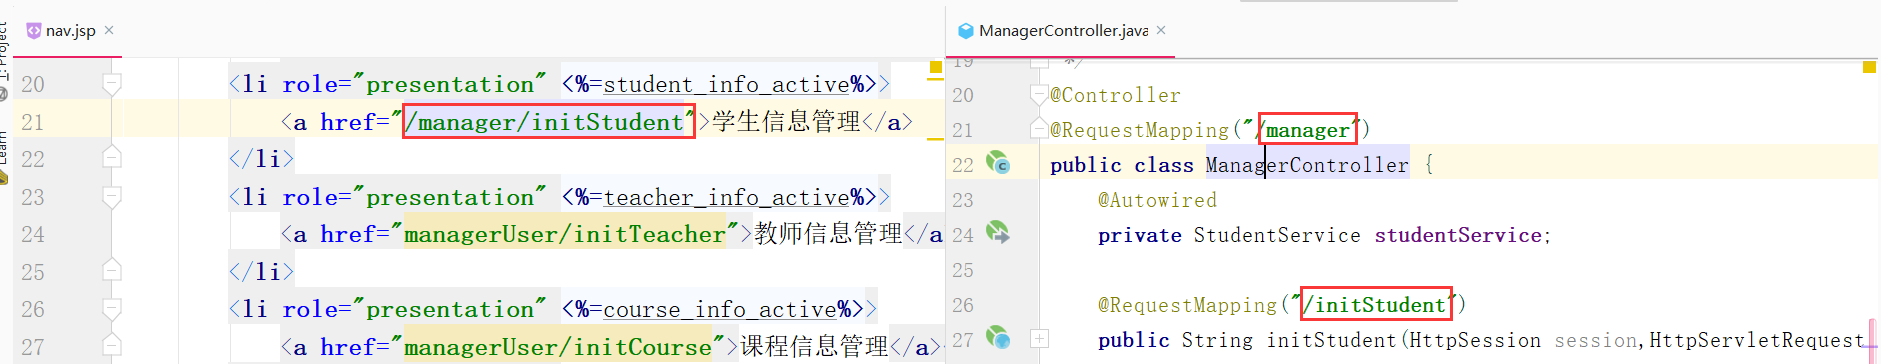 SSM报错The page you tried to access (/manager/initStudent) does not exist.